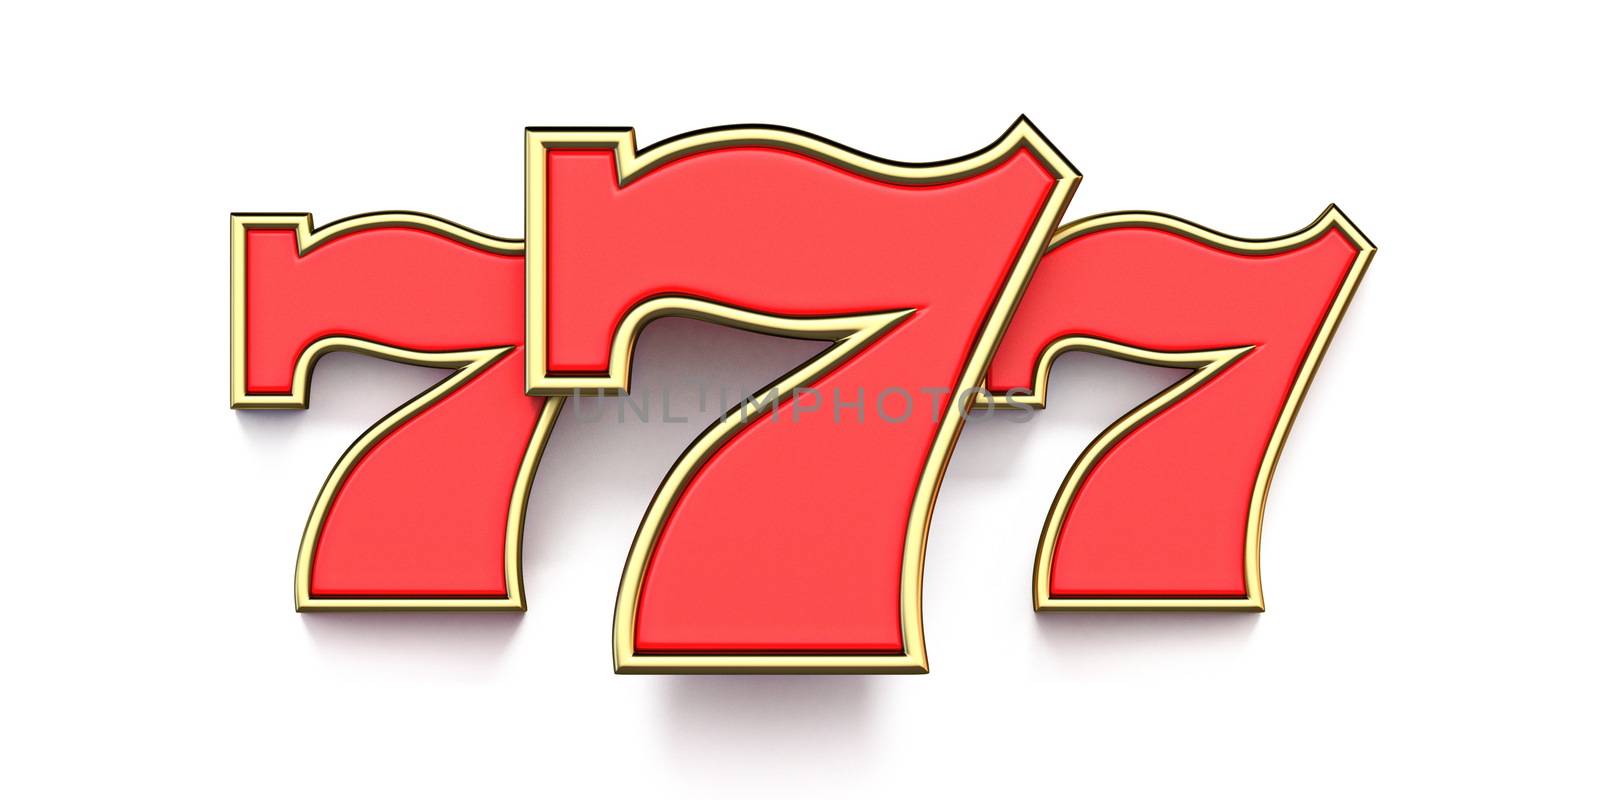 777 casino sign 3D render illustration isolated on white background